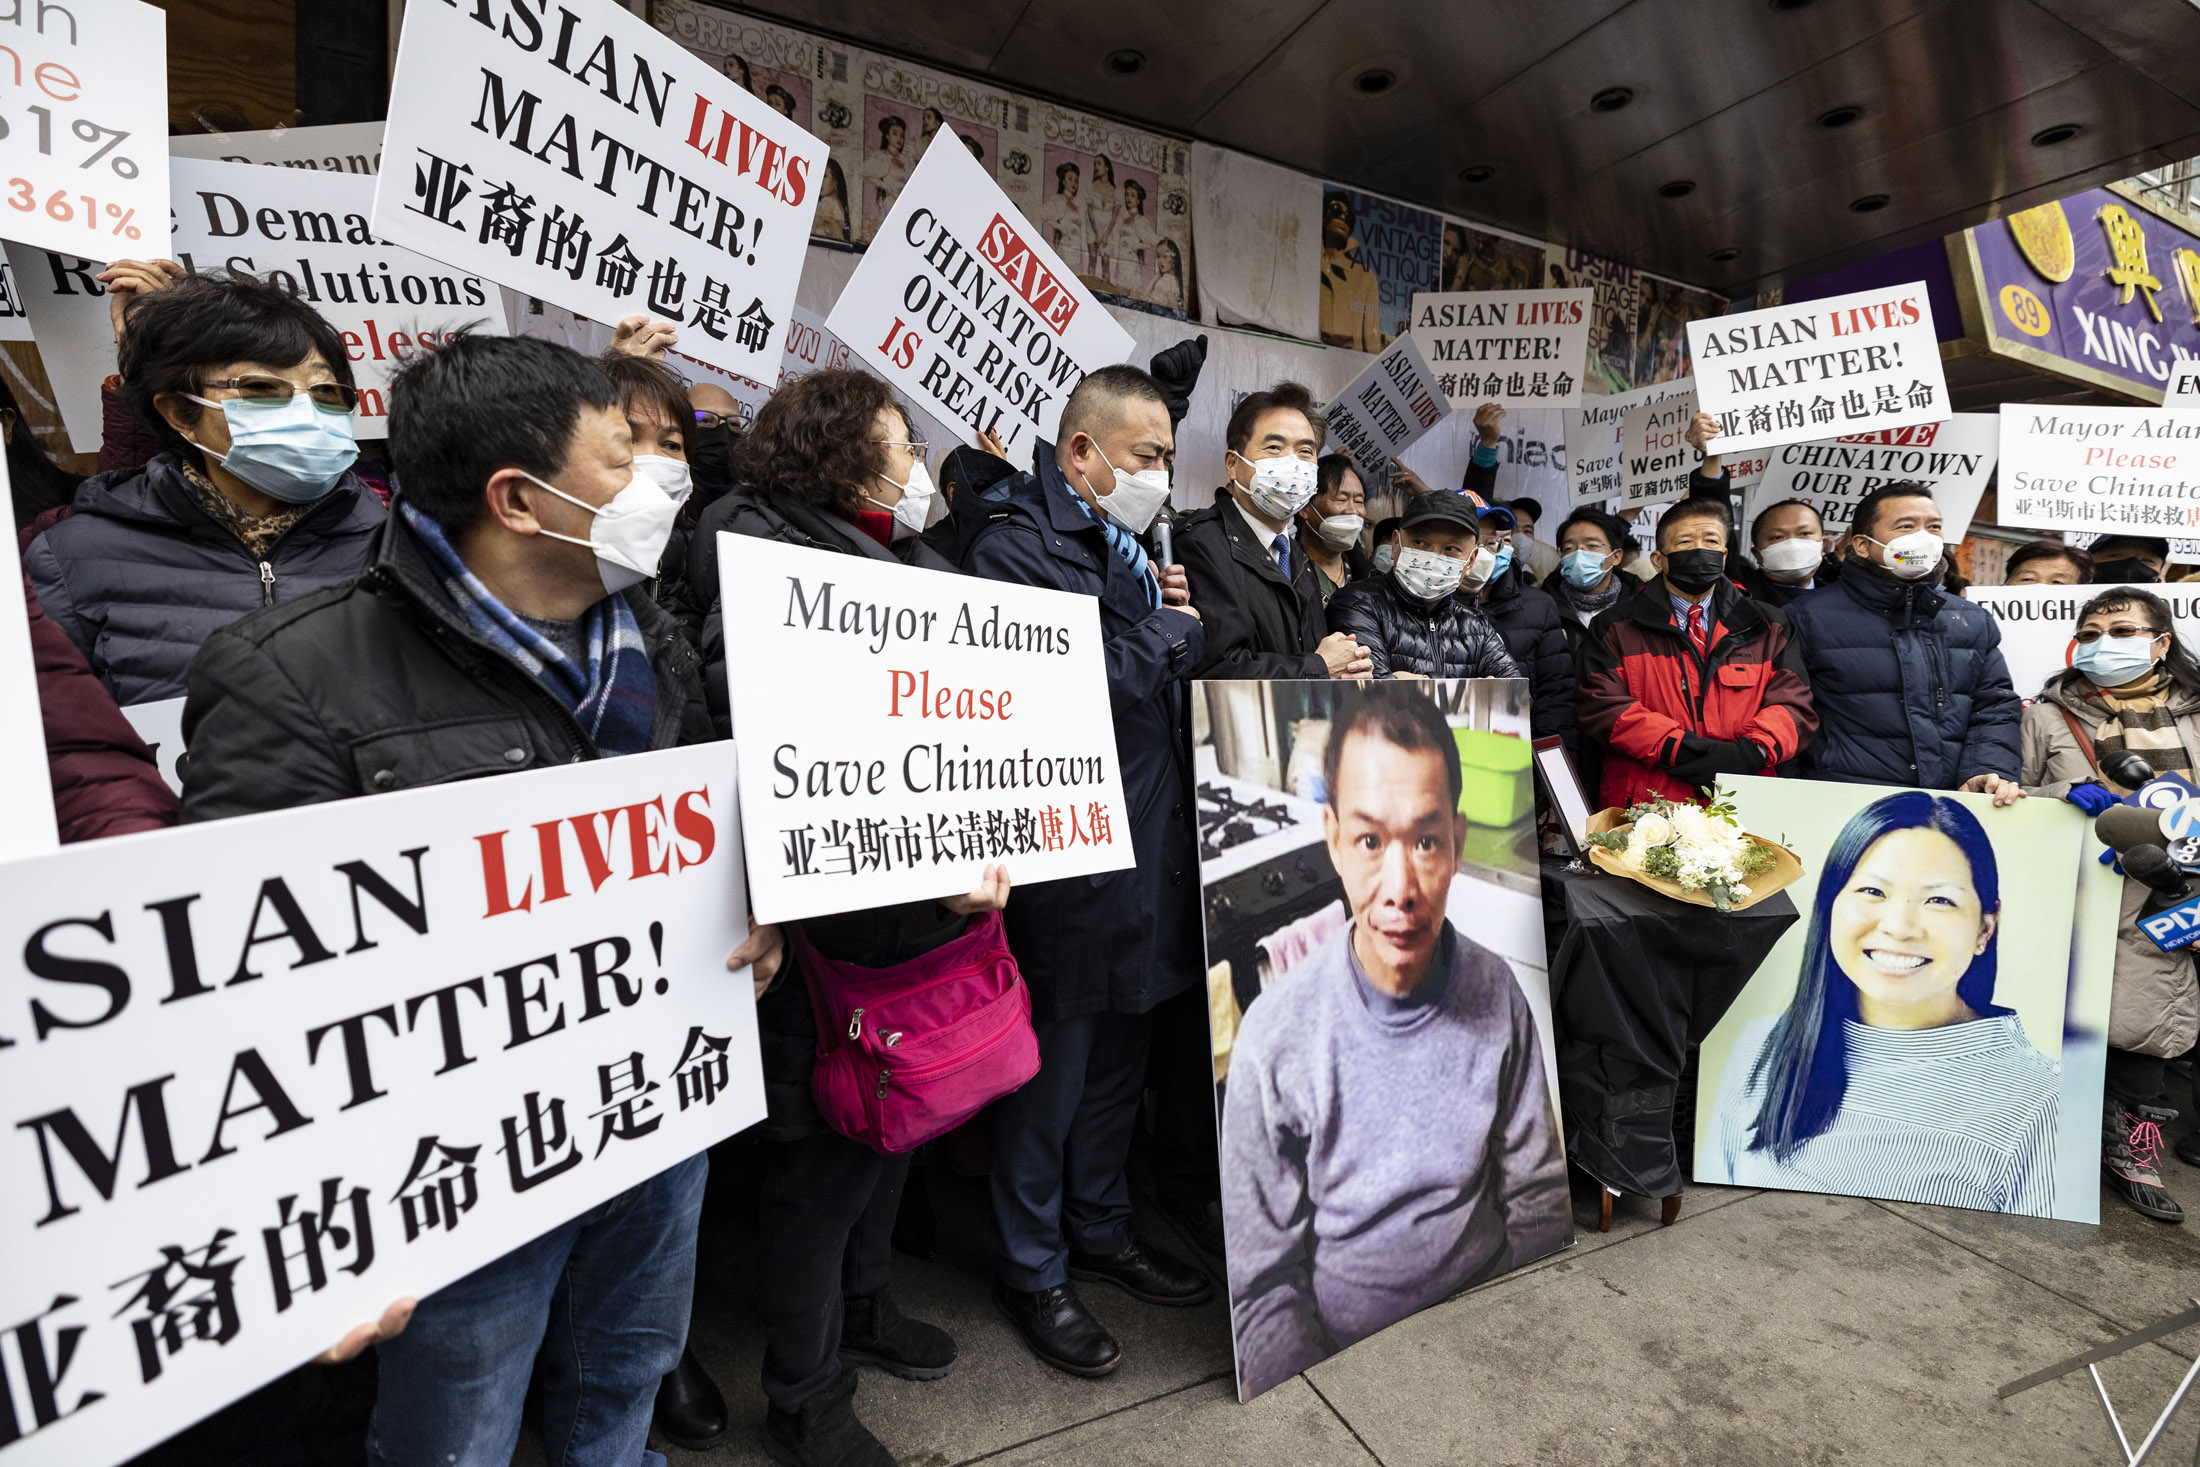 Demonstrators in Manhattan’s Chinatown protest surging violence against Asian-Americans, including victims Yao Pan Ma, pictured in poster on left, and Michelle Go, poster on right.